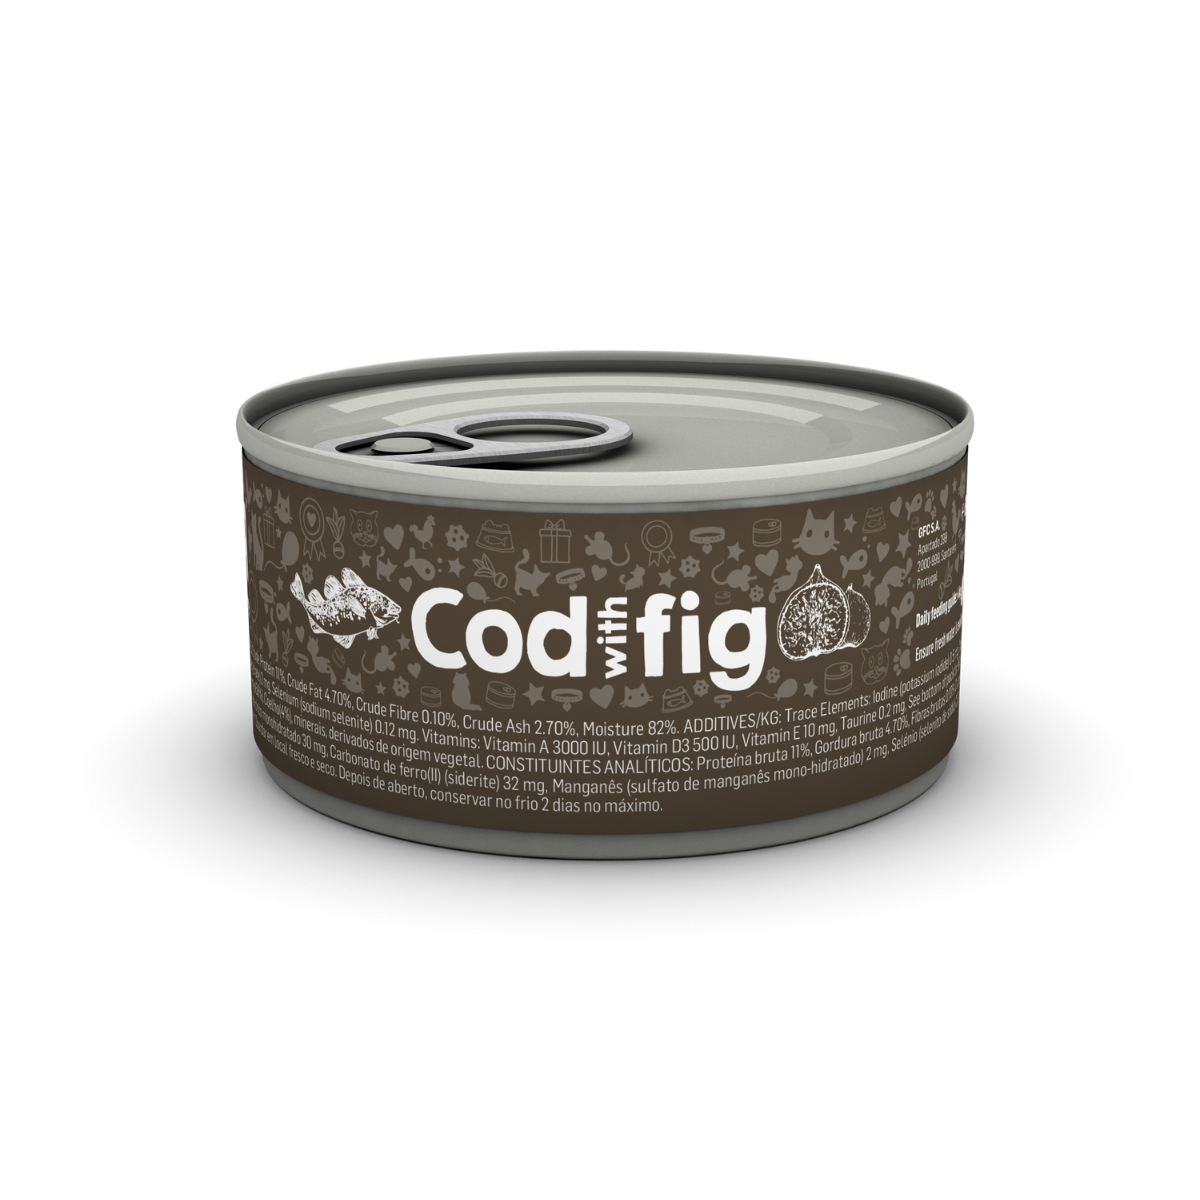 Cod, tuna with fig - canned food for cats and kittens